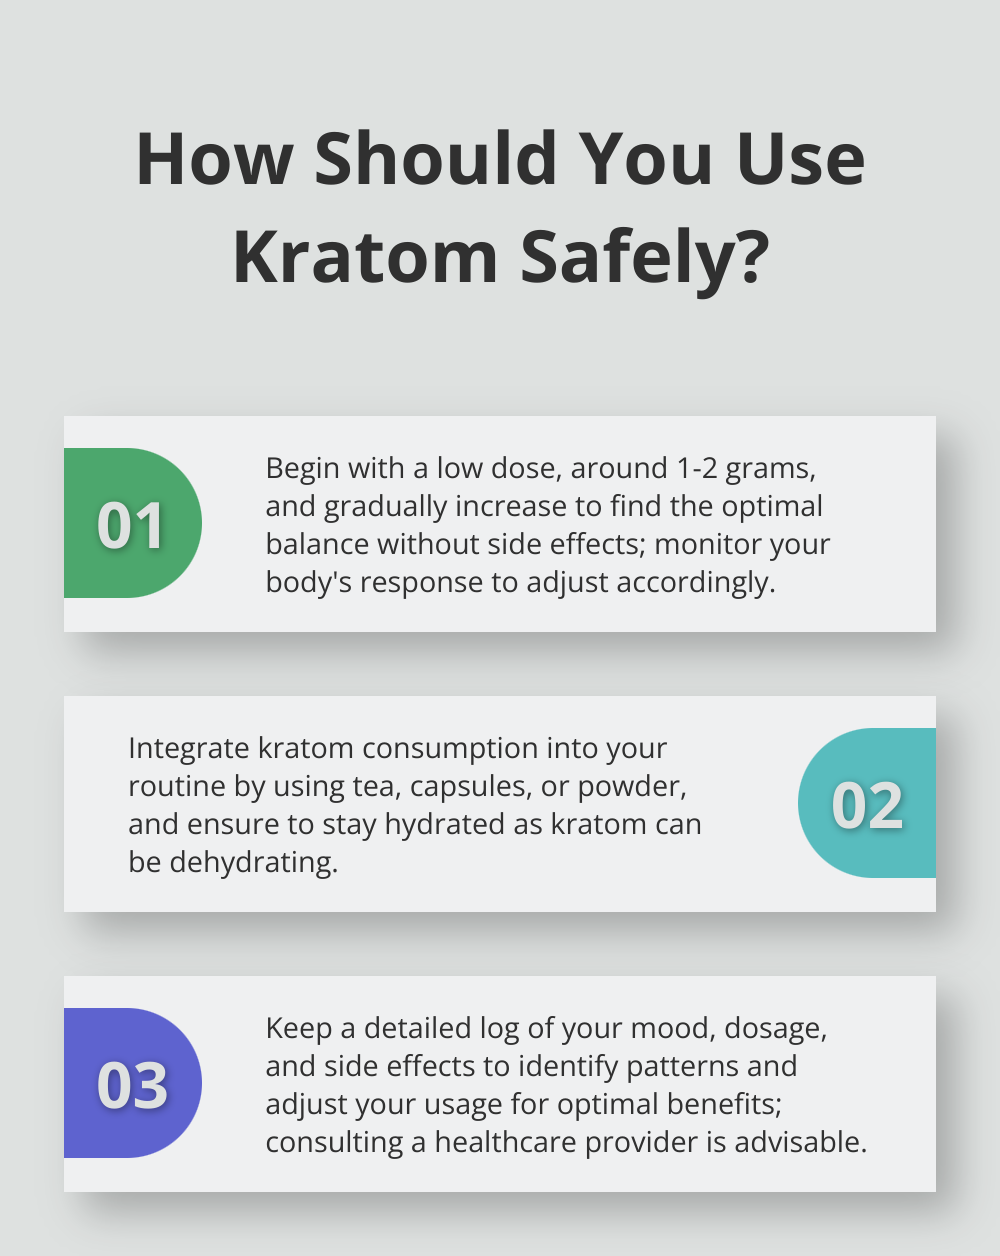 Fact - How Should You Use Kratom Safely?